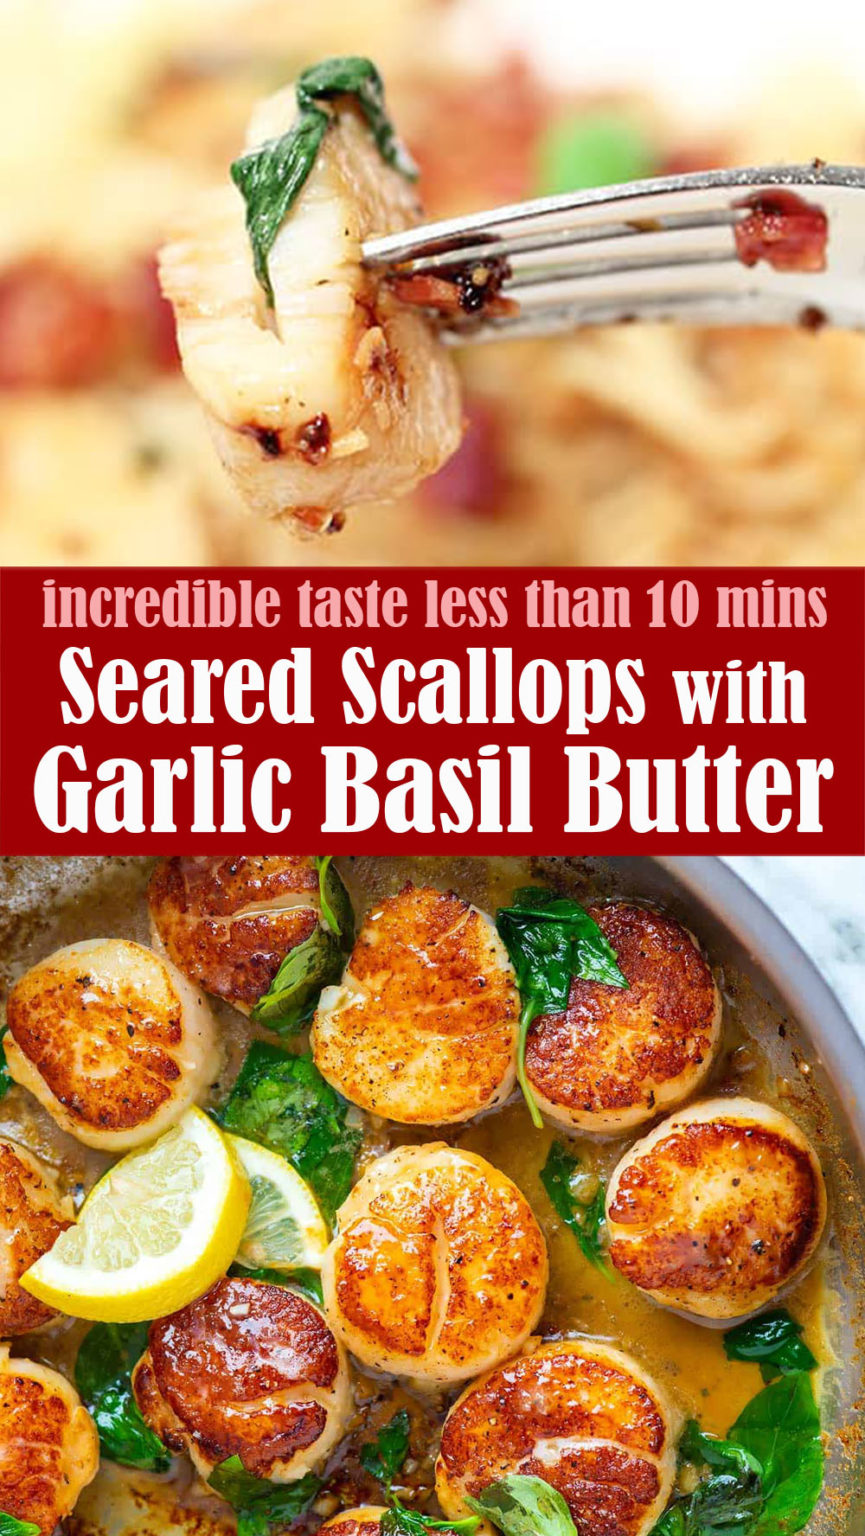 10 Minute Seared Scallops with Garlic Basil Butter – Reserveamana